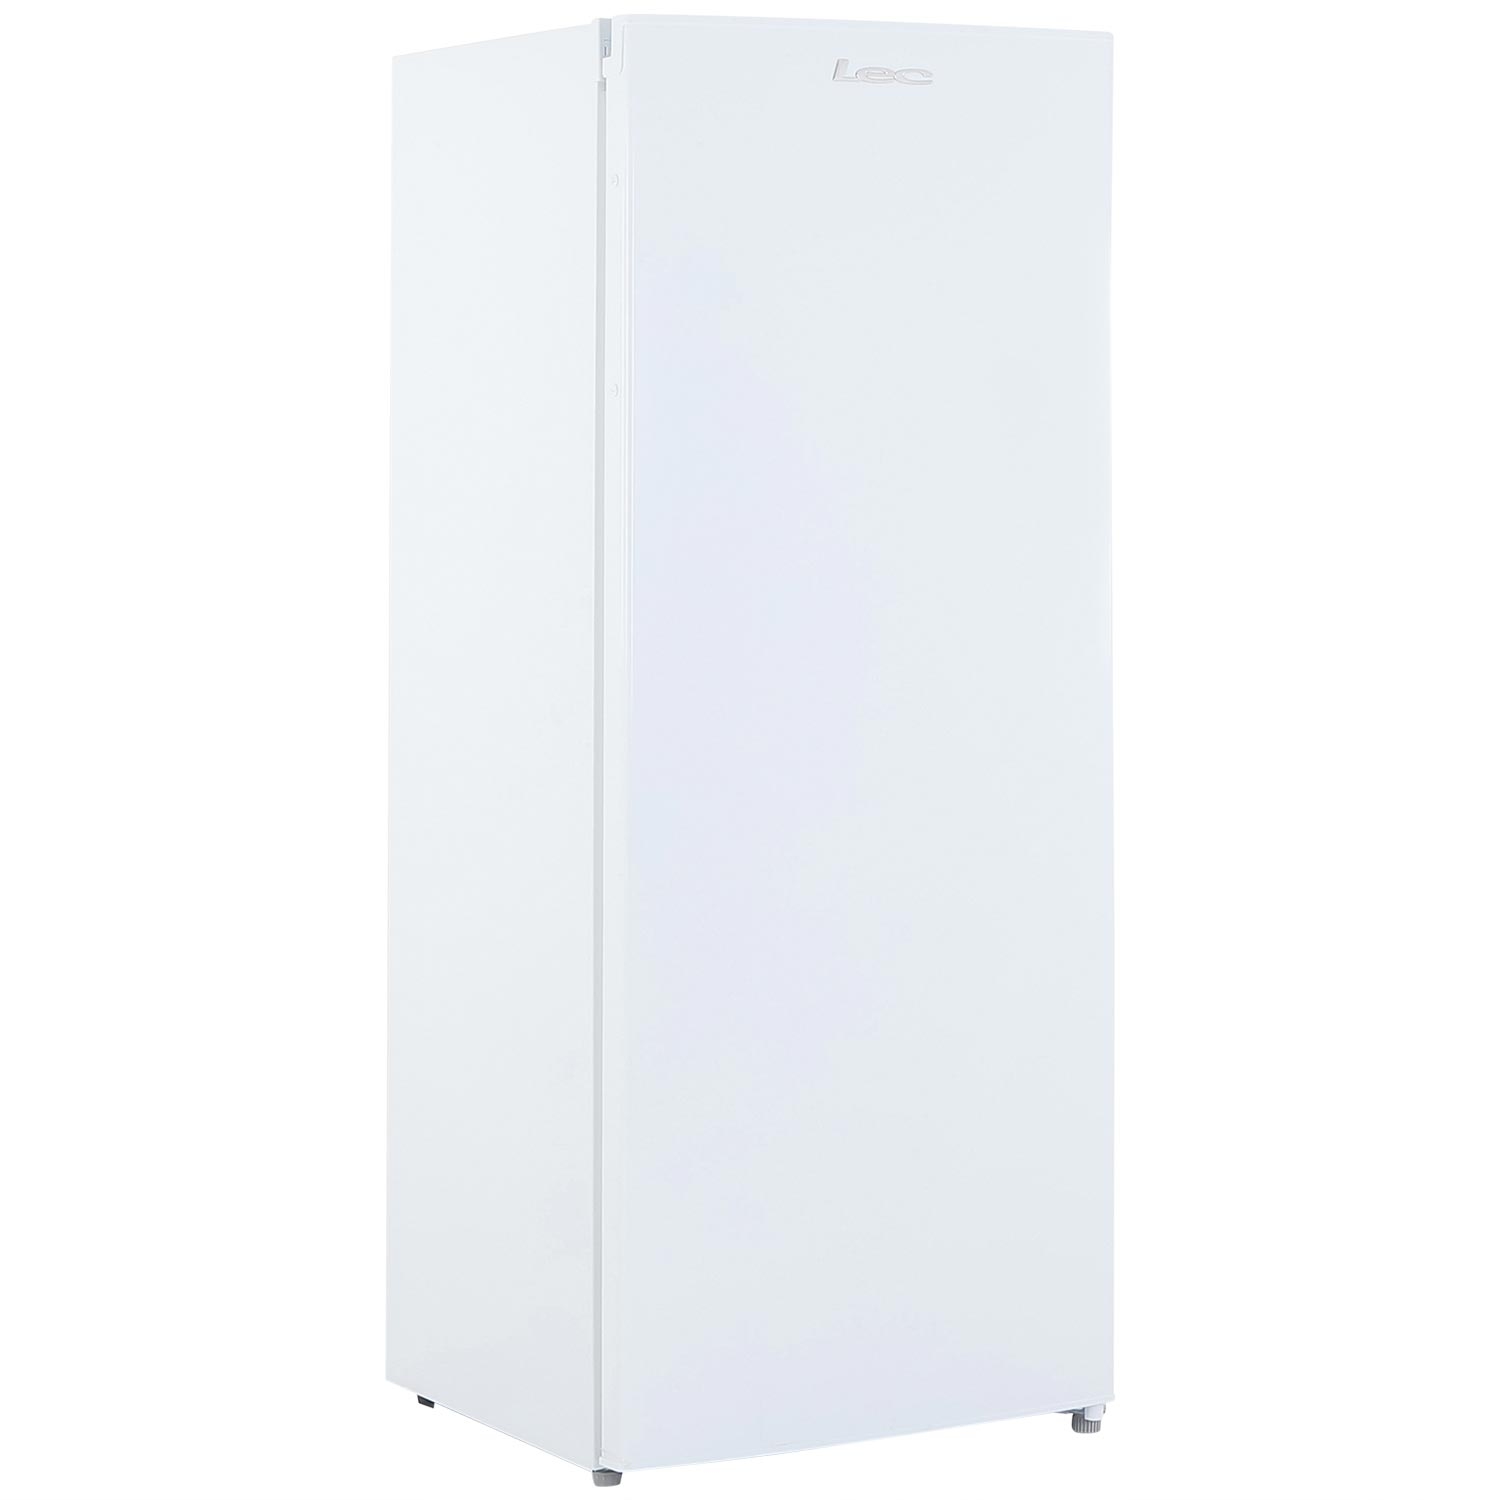 Lec 55cm Tall Freezer - White - A+ Rated - 1